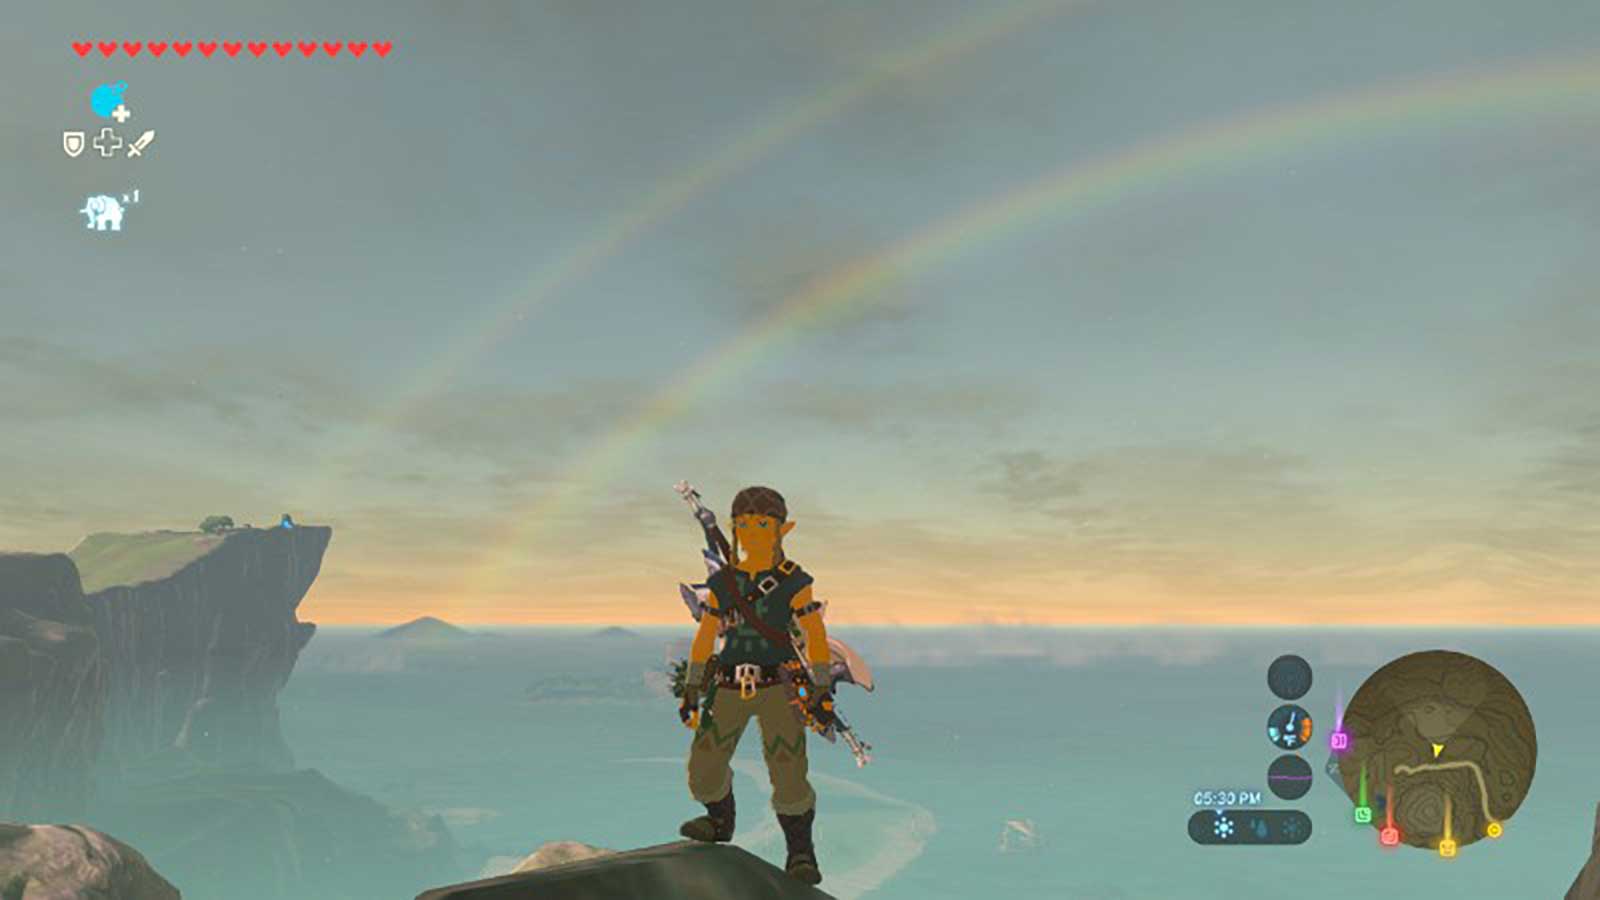 Link on the mountainside with a double rainbow apparent in the background